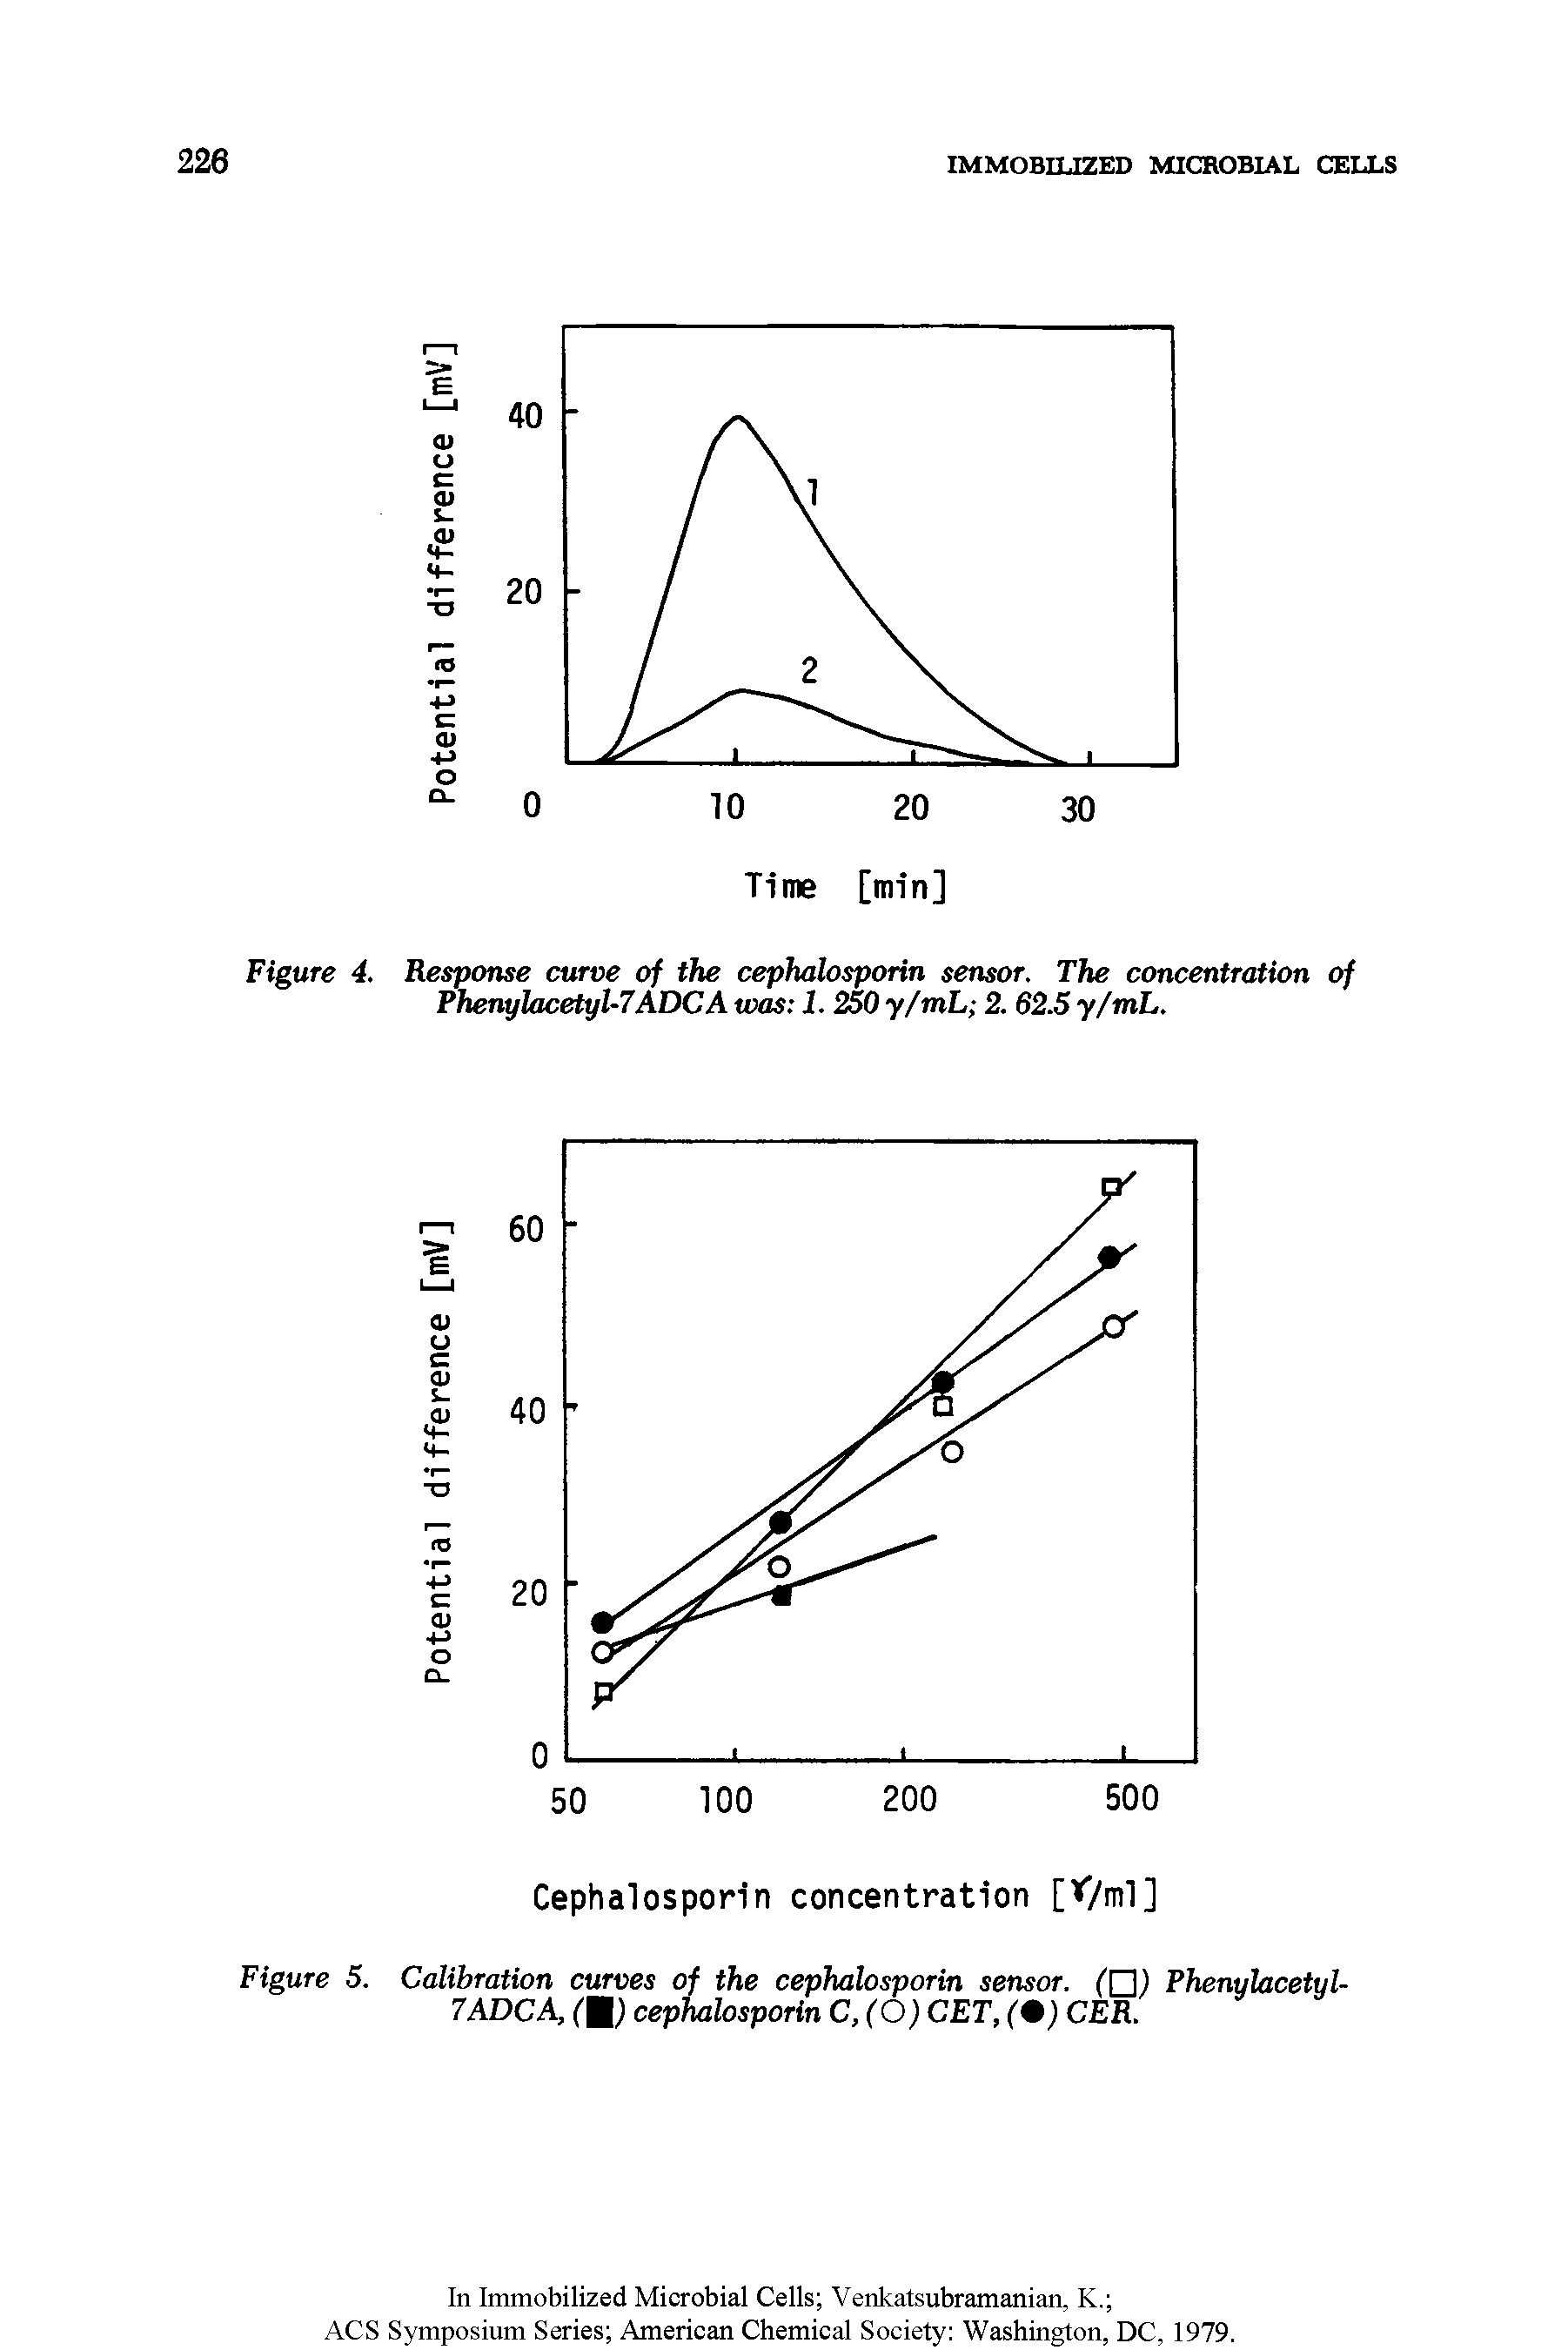 Figure 4. Response curve of the cephalosporin sensor. The concentration of Phenylacetyl-7ADCA tvas 1. 250 y/tnL 2. 62.5 y/mL.